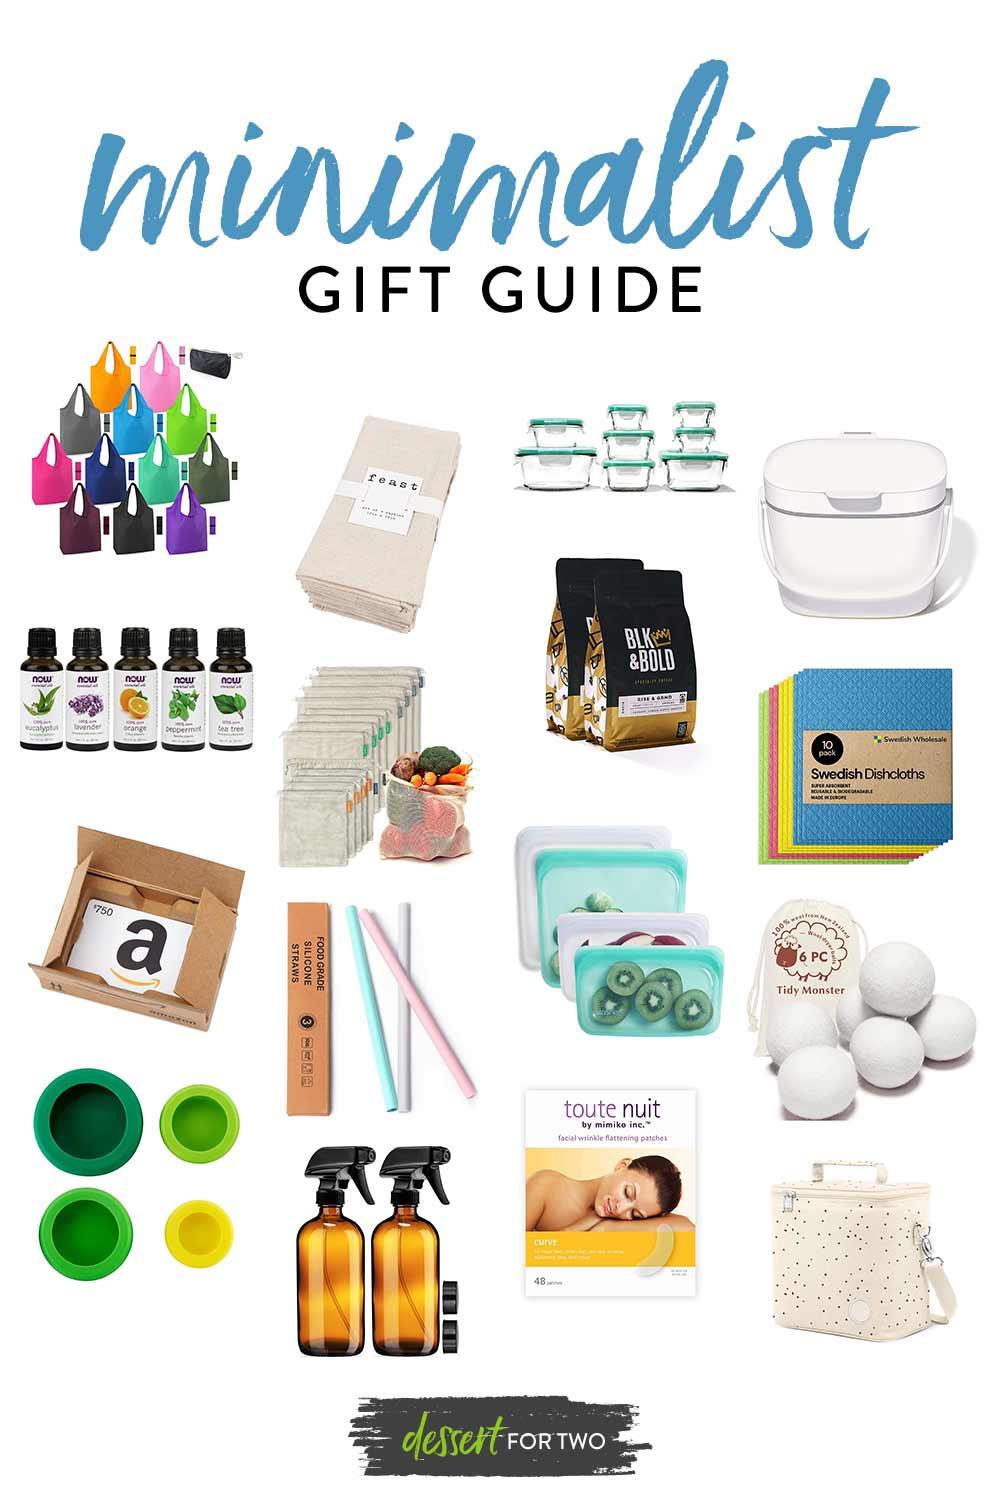 Gifting Guide